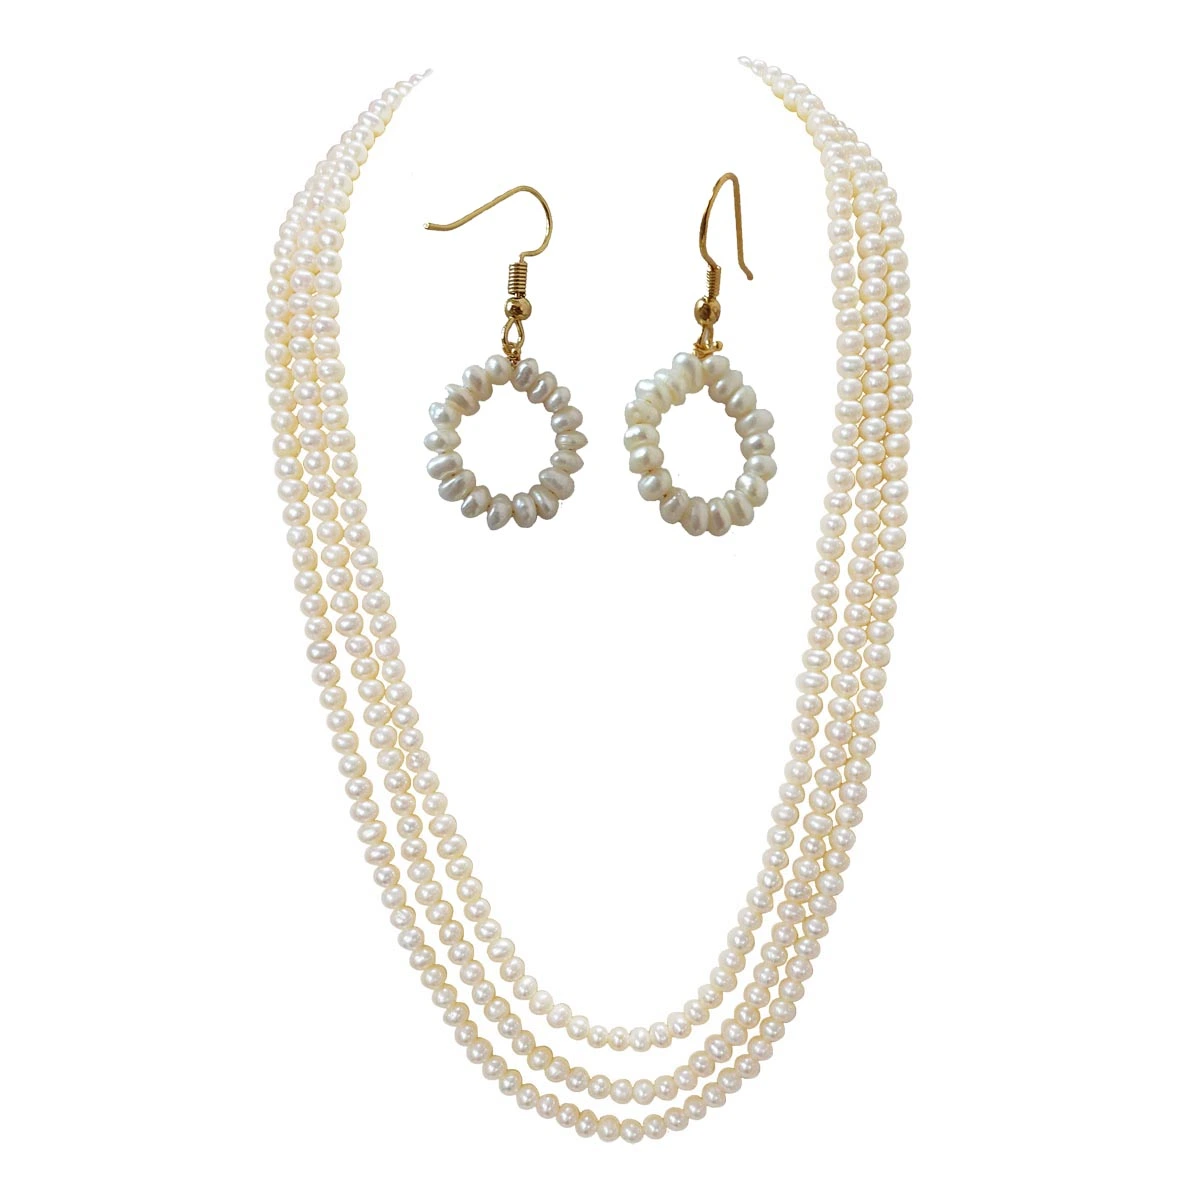 3 Line Real Natural Freshwater Pearl Necklace & Earrings Set for Women (SN1006+SE379)